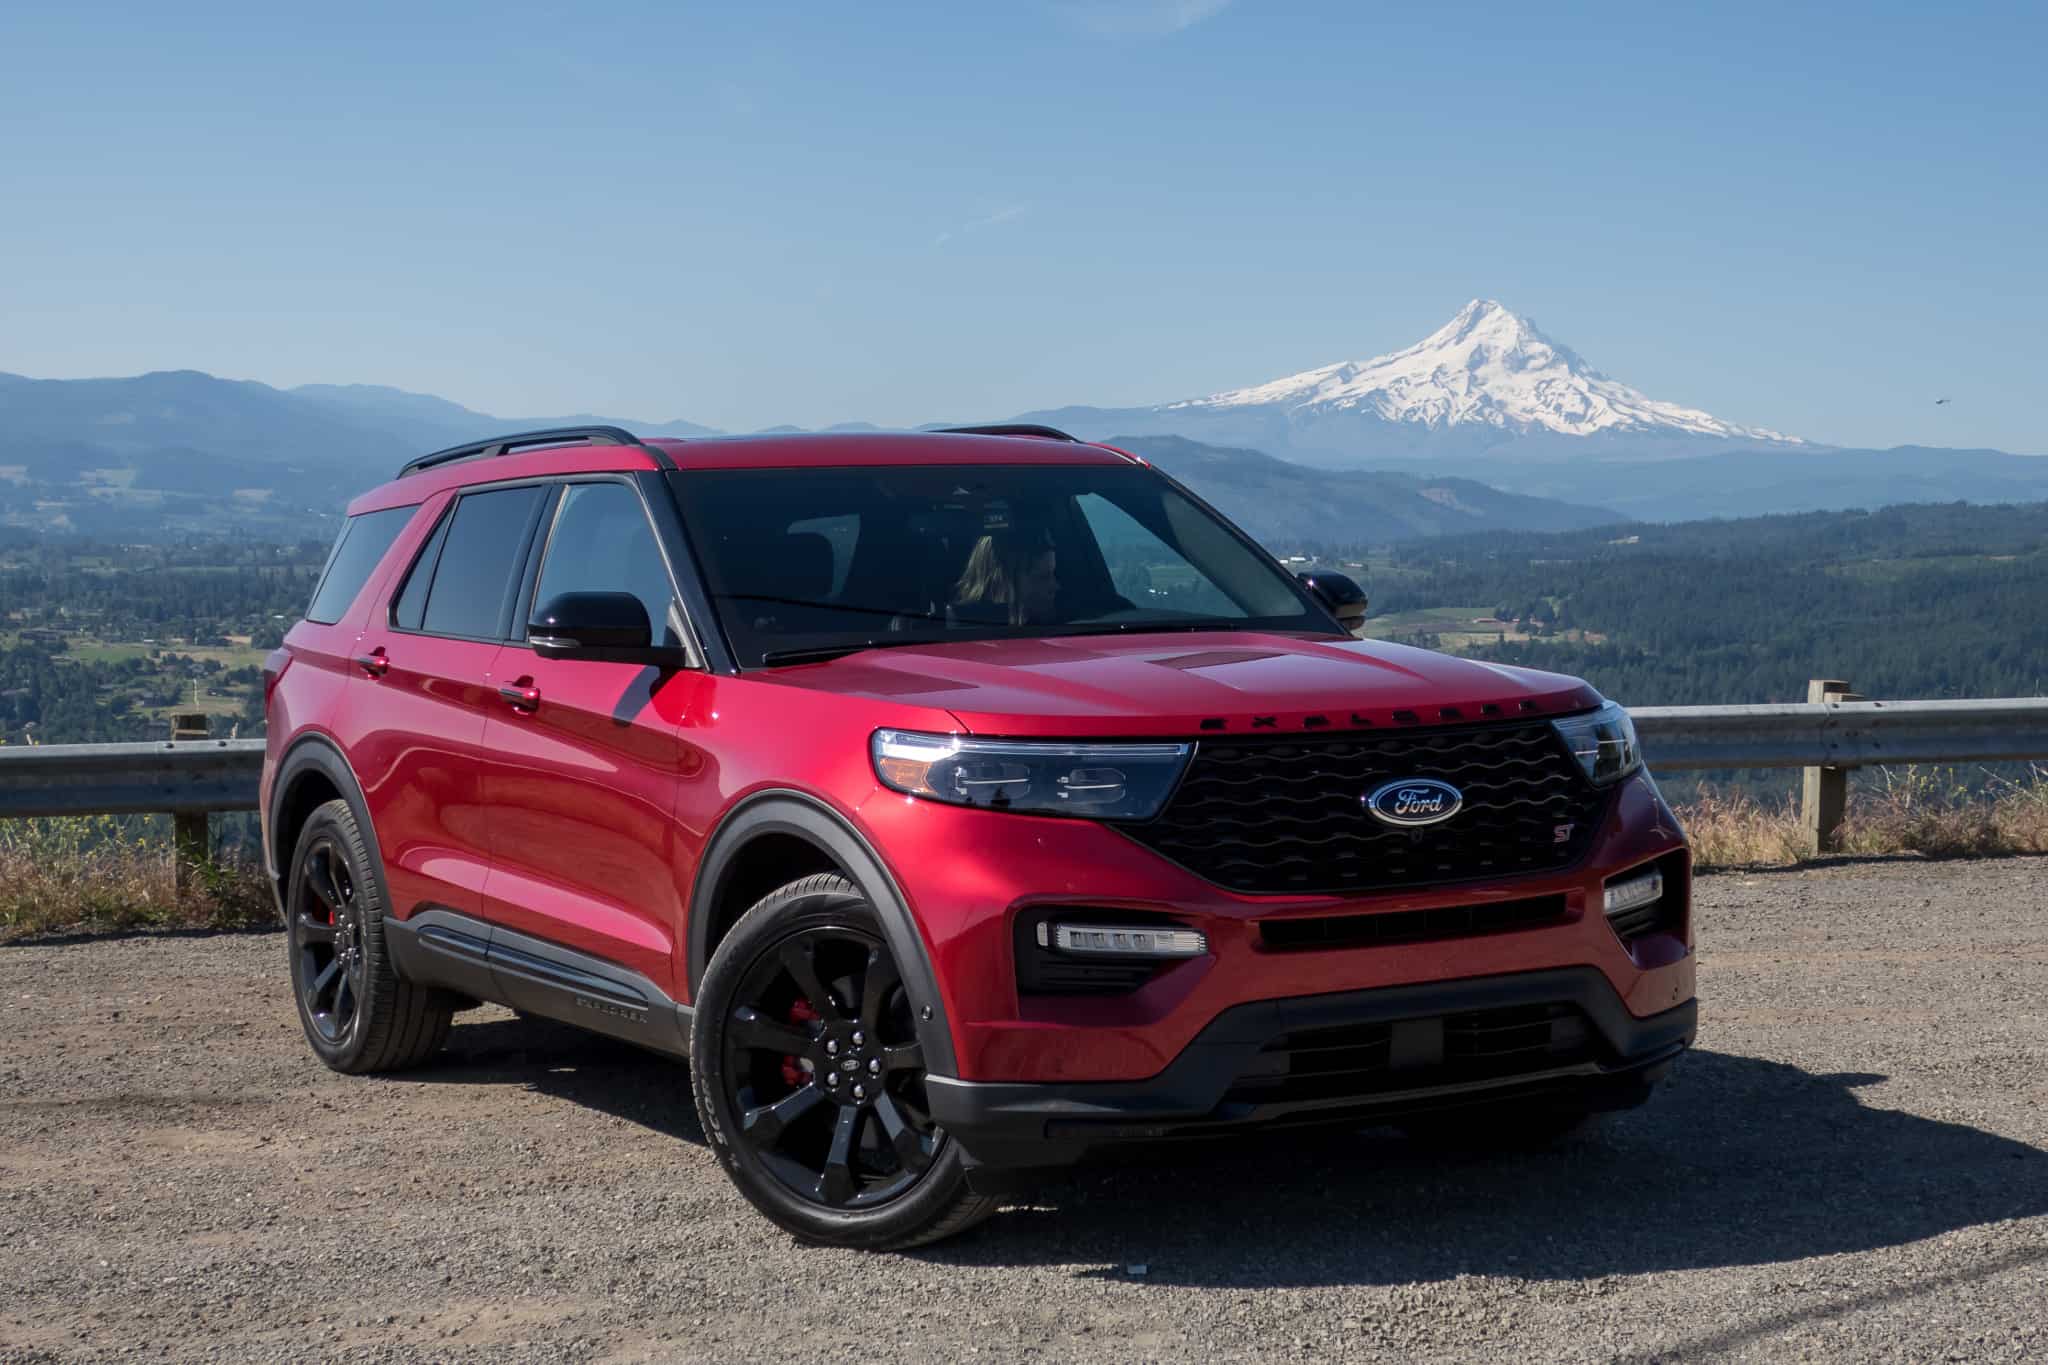 The 2020 Ford Explorer